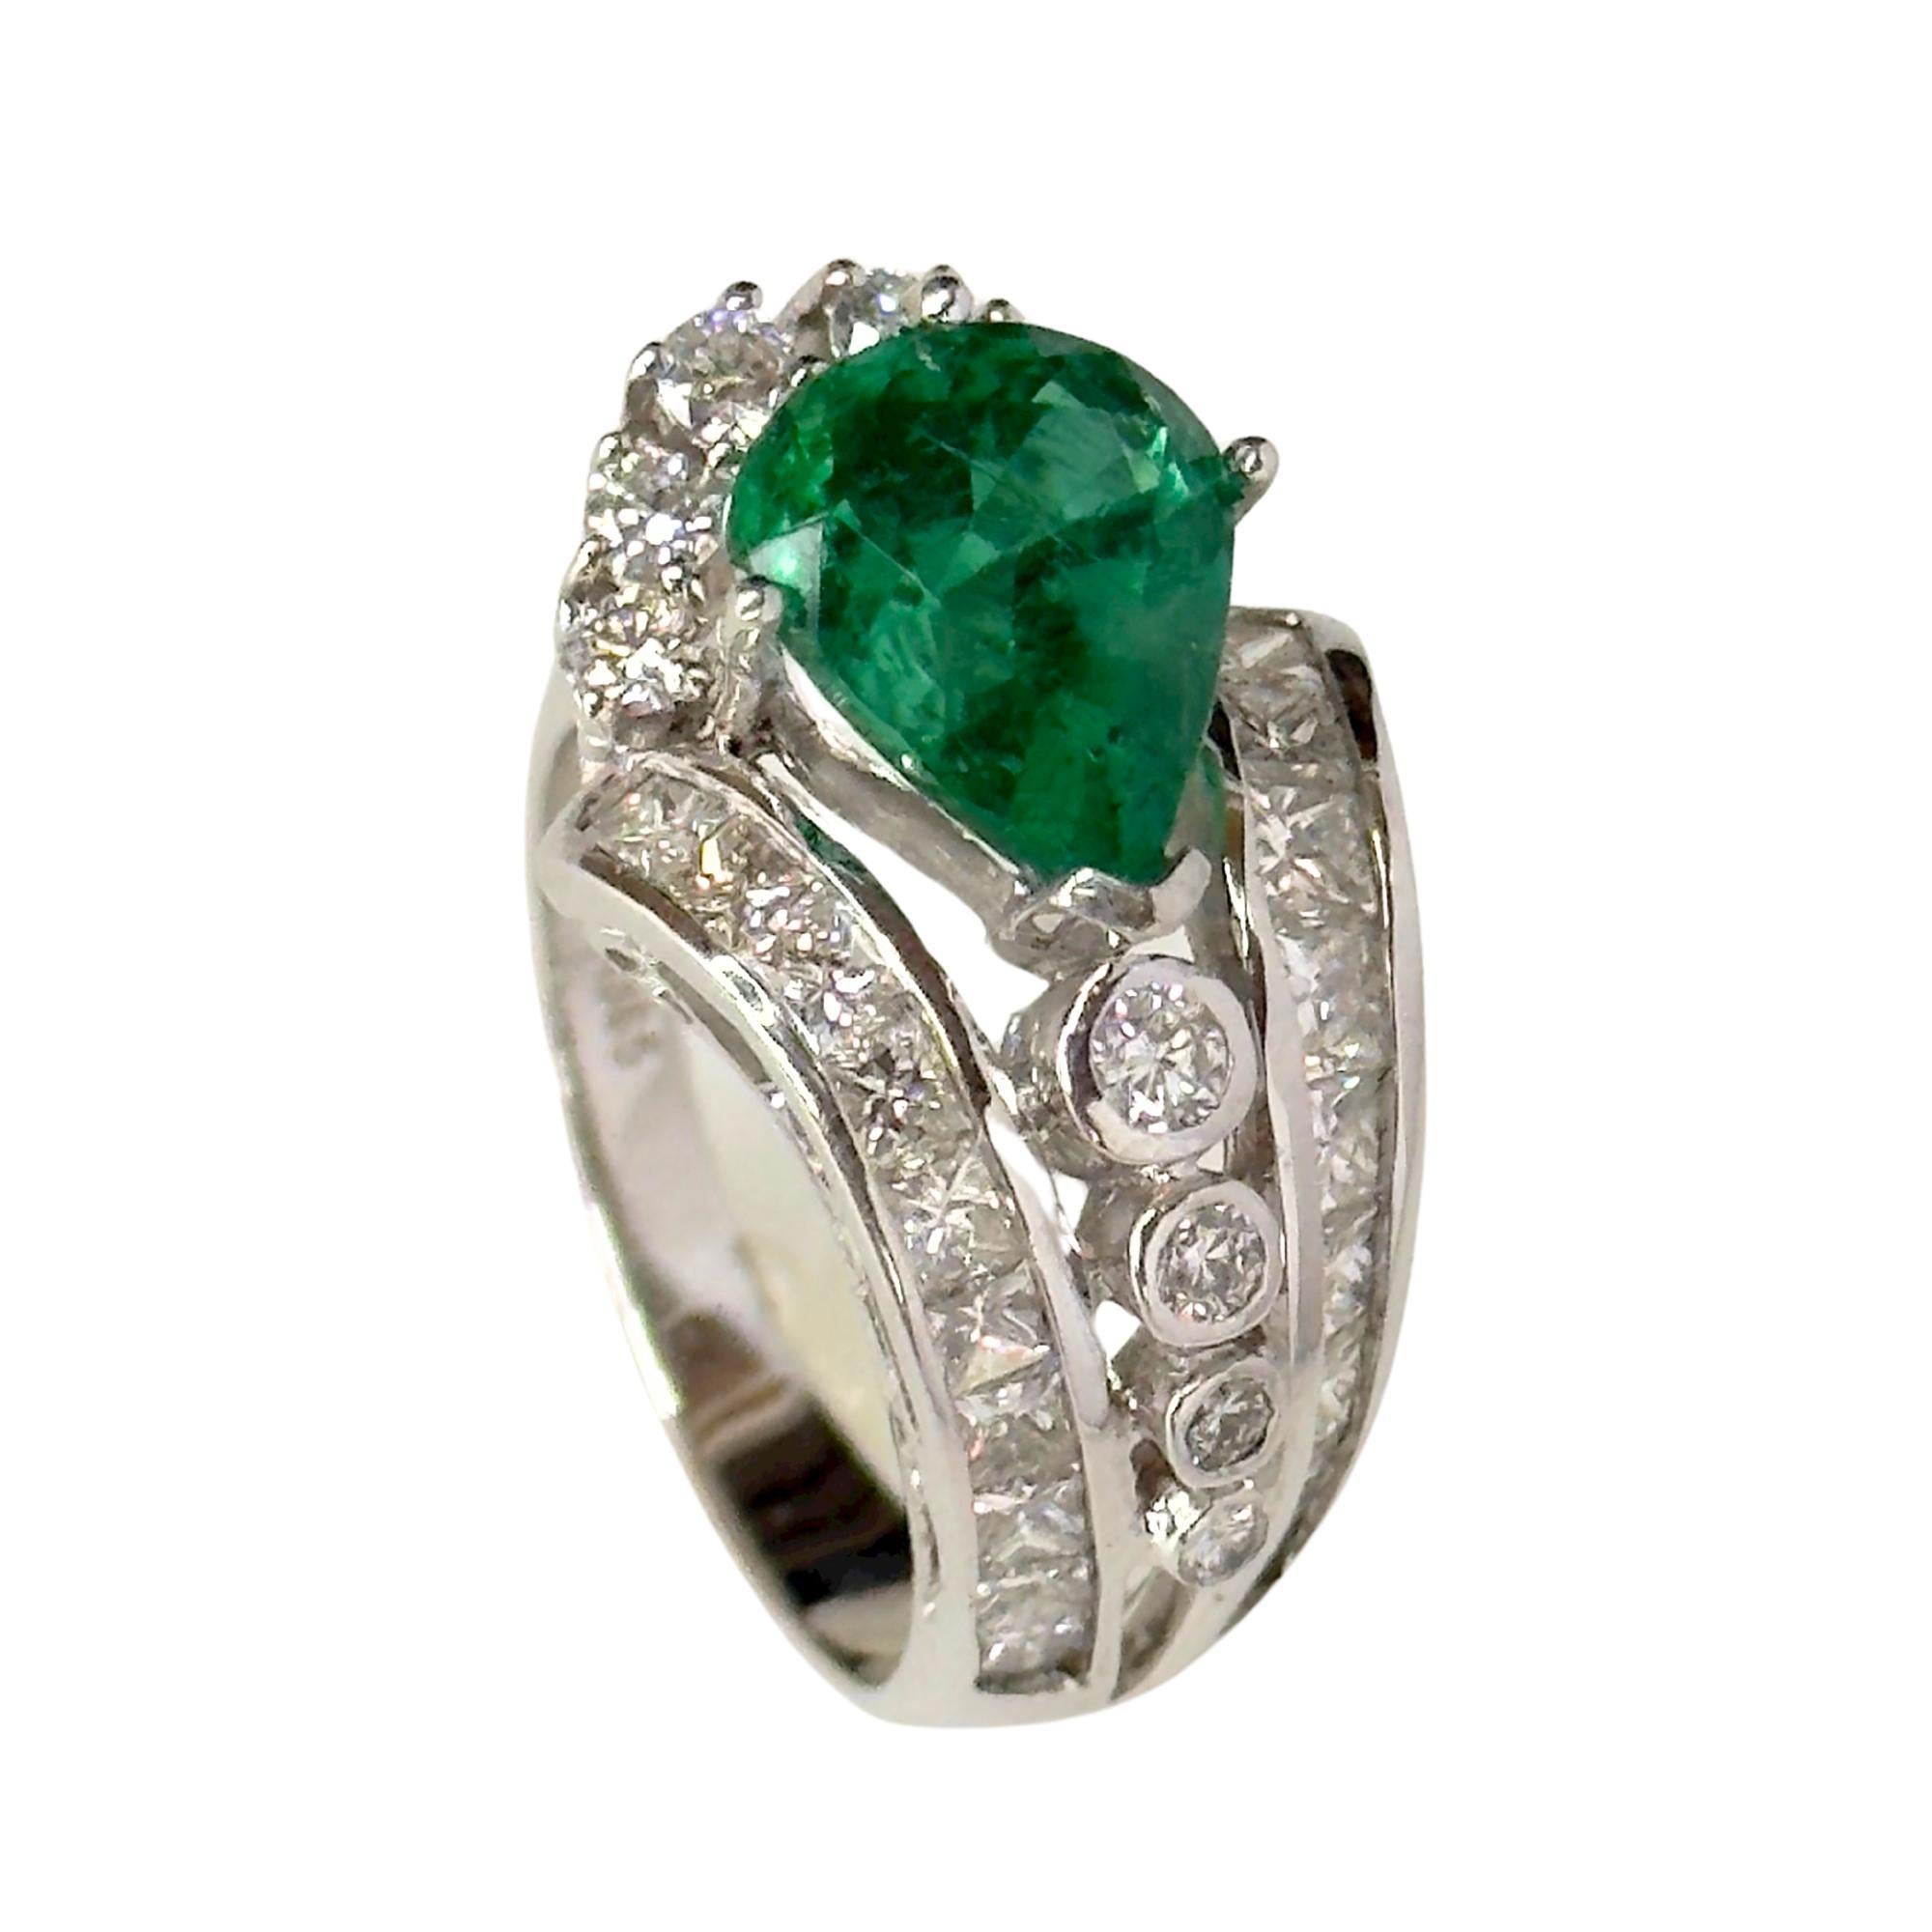 Feel luxurious with this GIA Certified 18k Diamond and Emerald Ring! In good condition with minor wear, this ring boasts a stunning 2.77 carat emerald and sparkling 1.27 carat princess cut diamonds, with 0.44 carats of diamond accents. Weighing 7.33